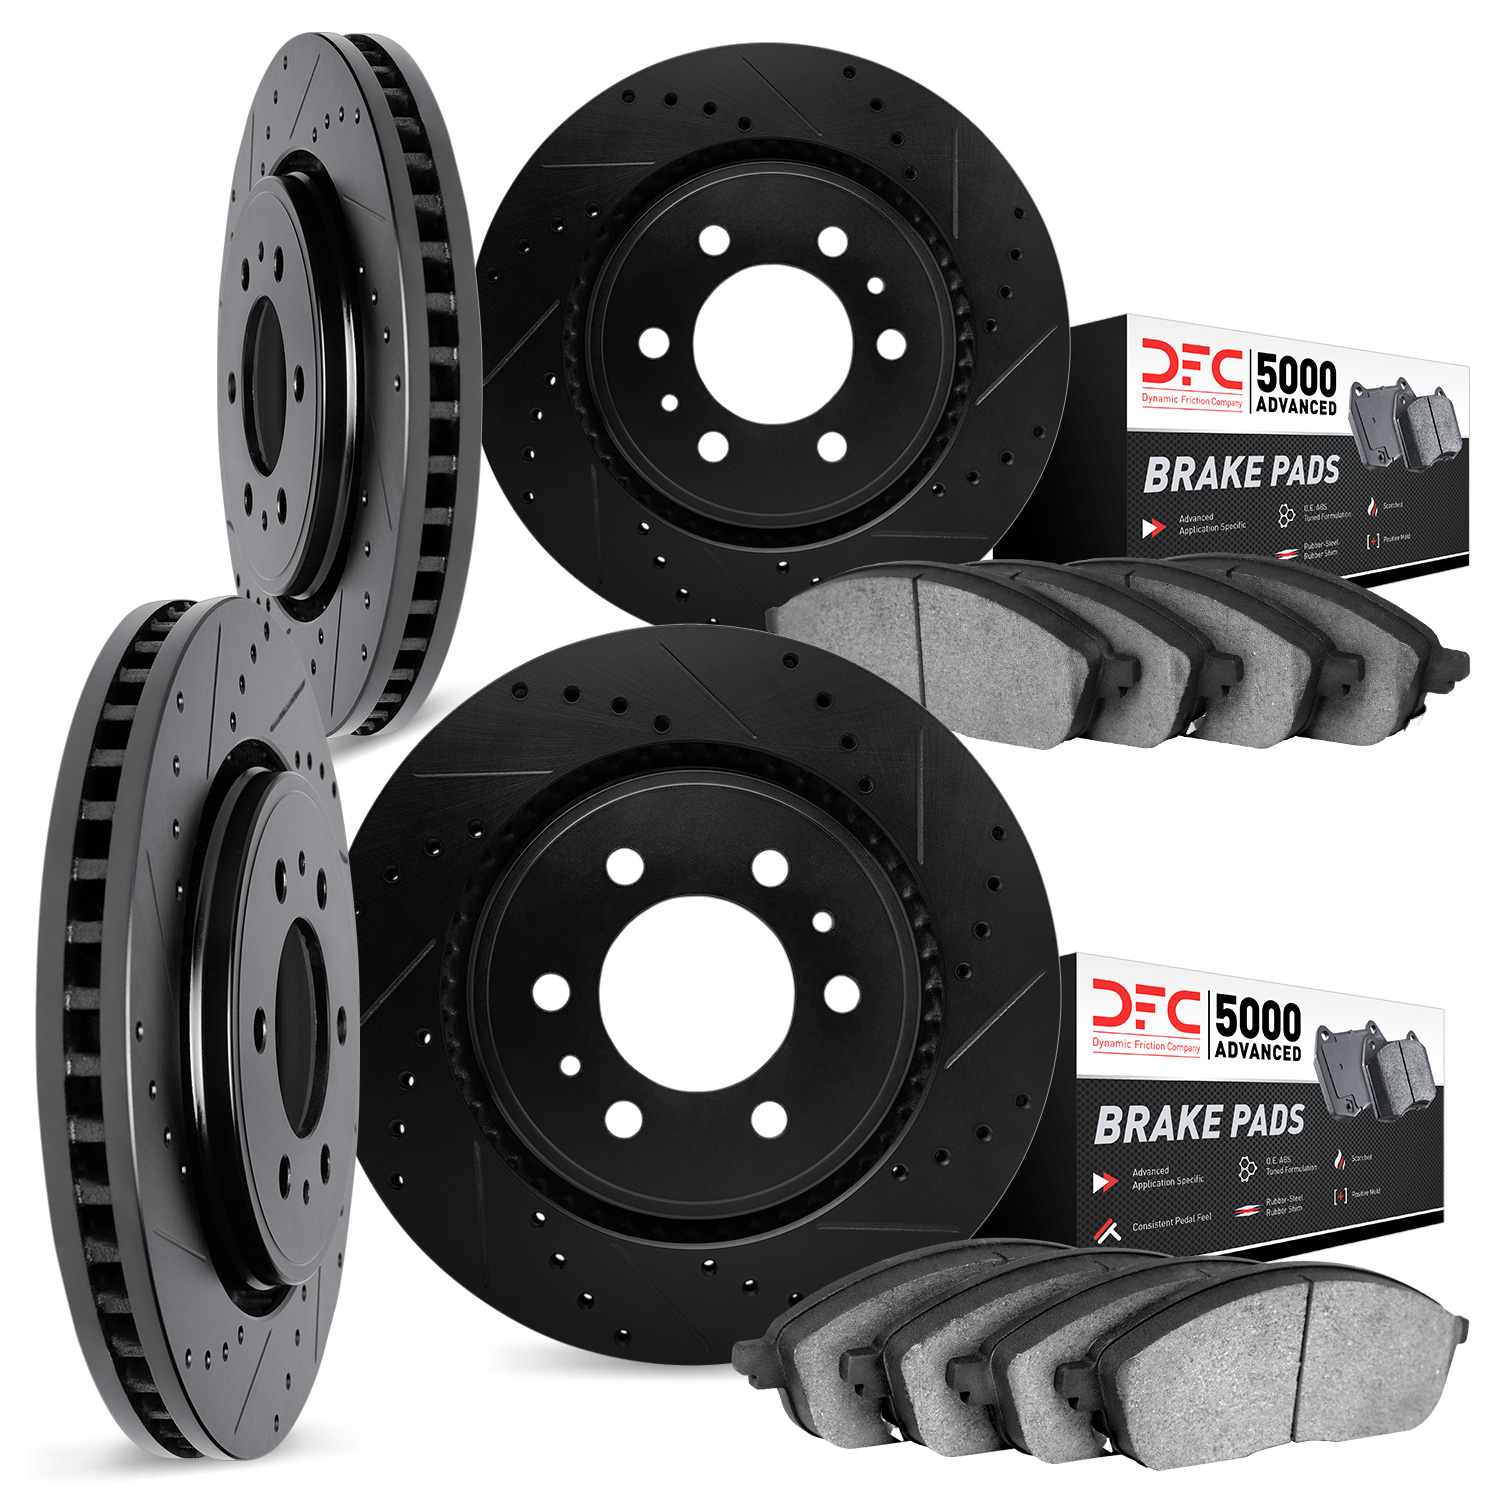 8504-46048 Drilled/Slotted Brake Rotors w/5000 Advanced Brake Pads Kit [Black], 2017-2020 GM, Position: Front and Rear